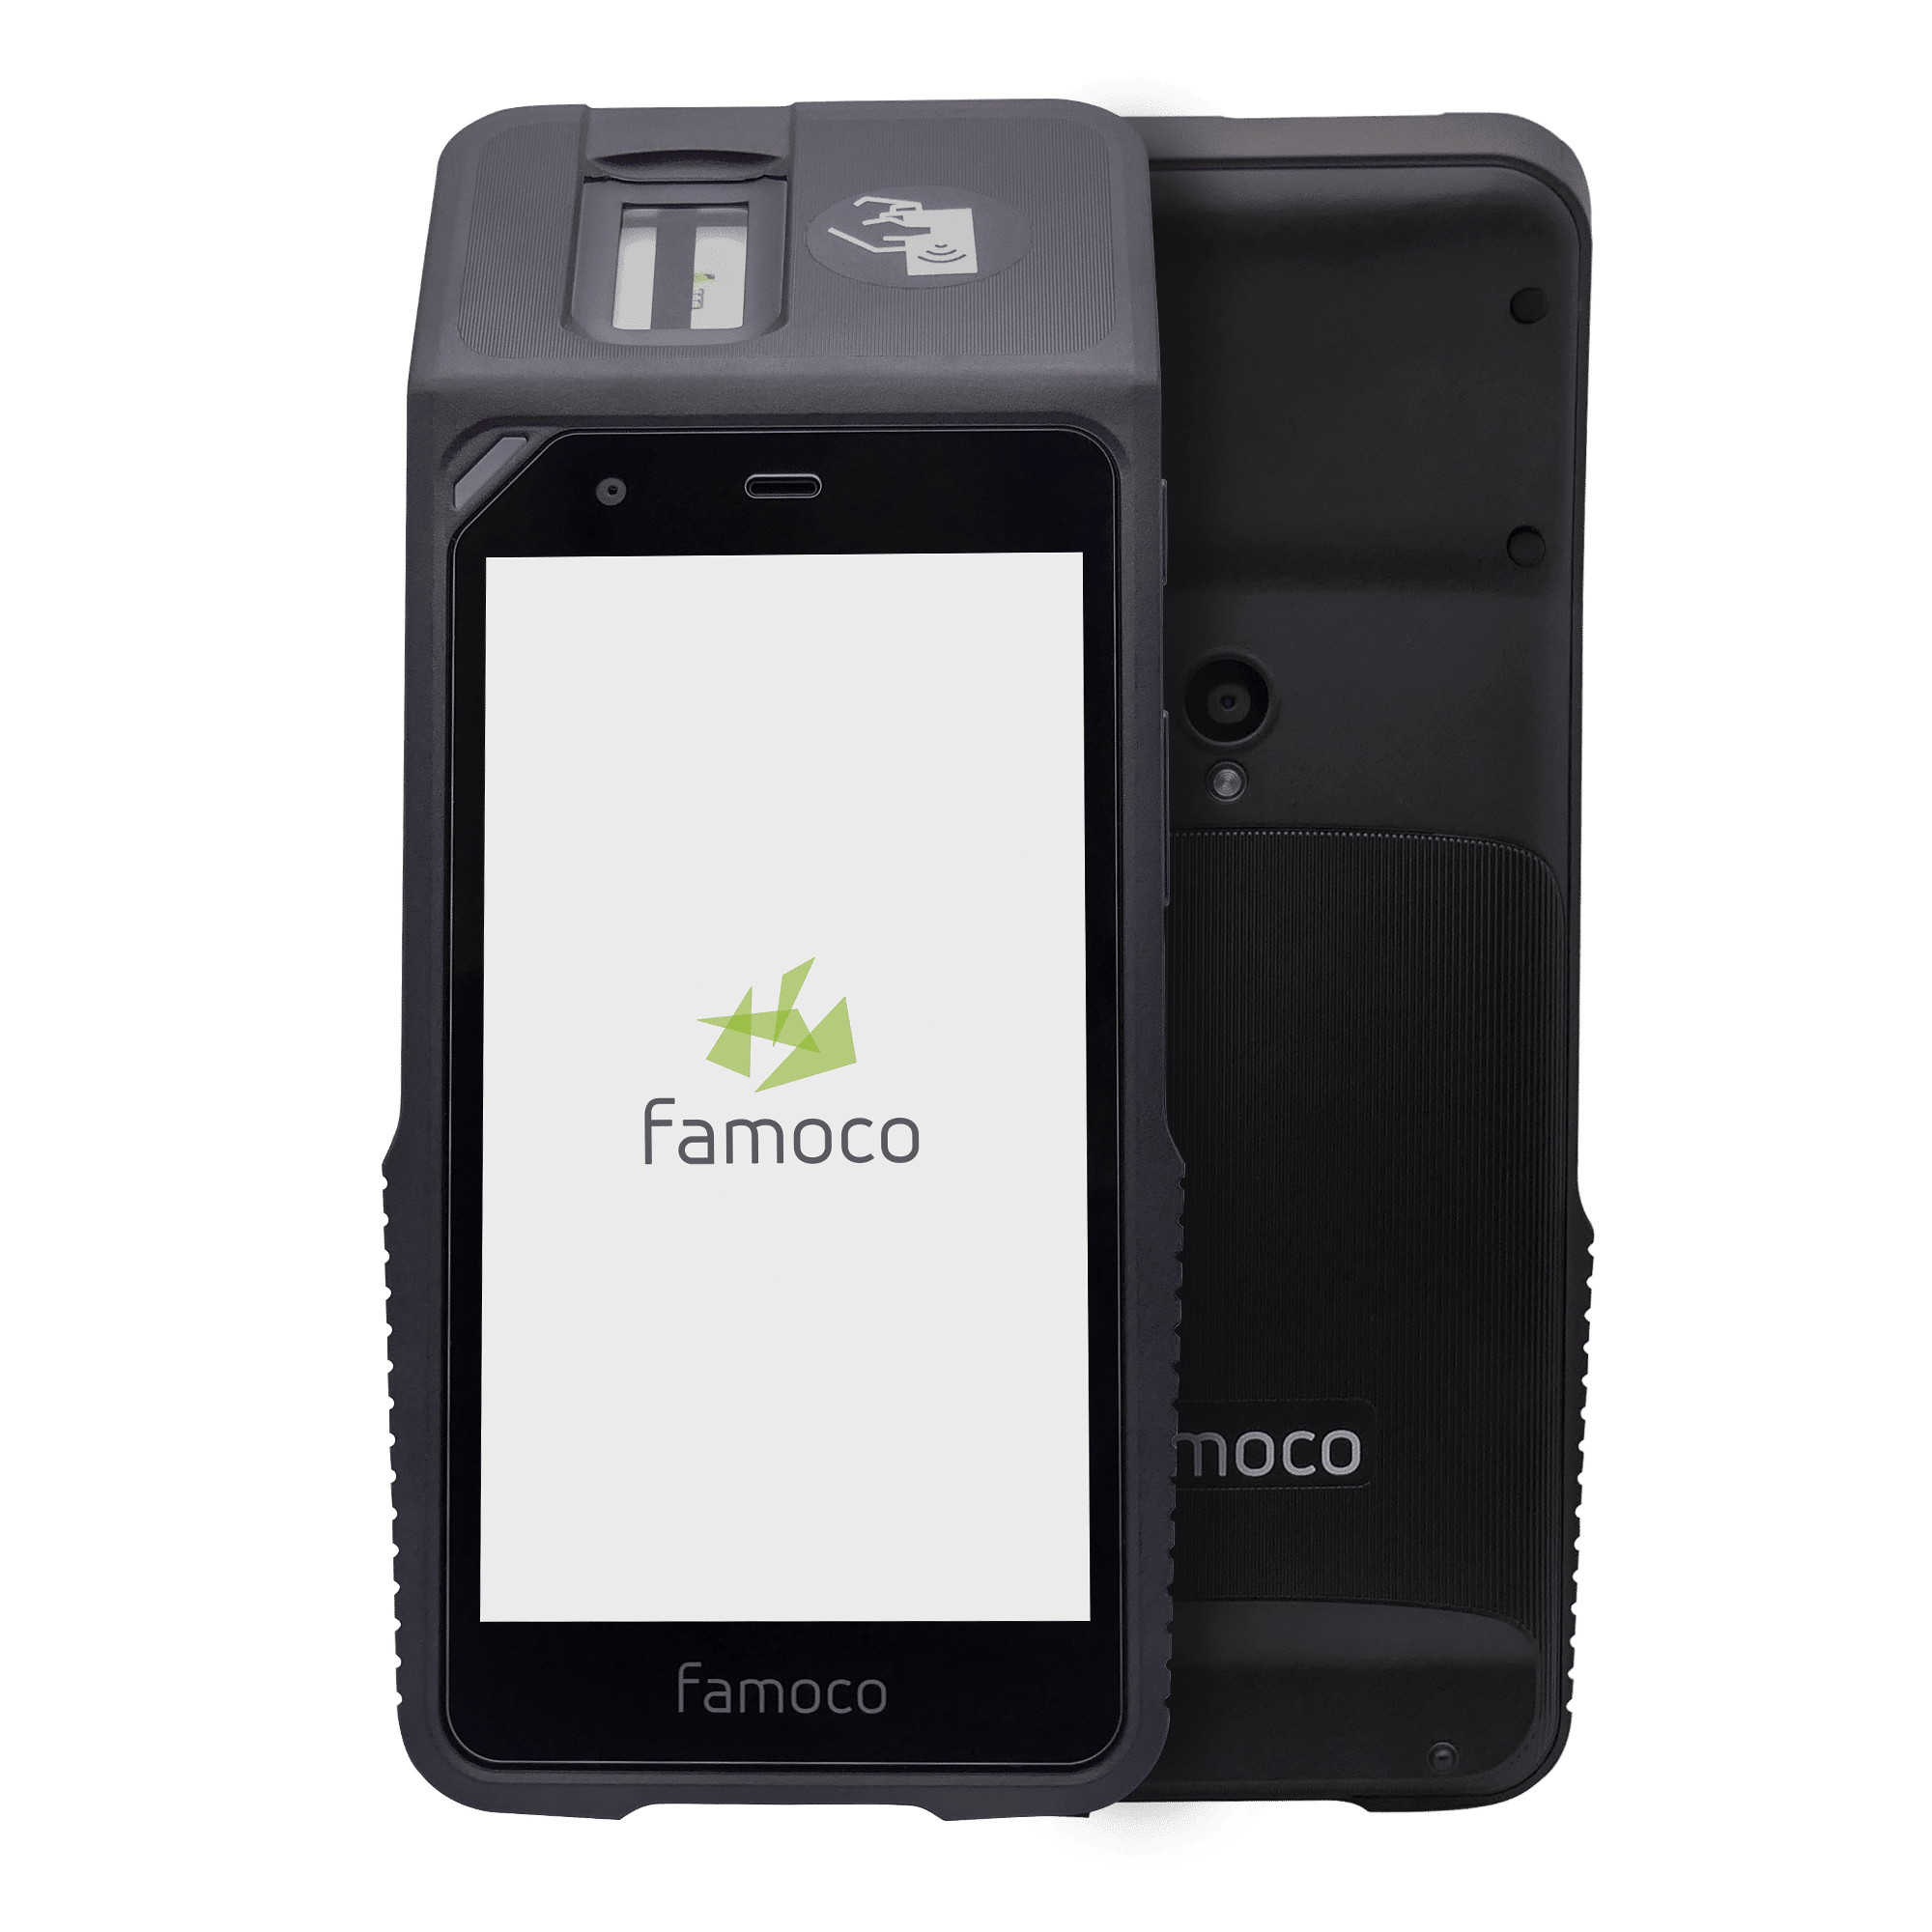 Famoco Blog: read articles about Android devices & MDM | Famoco | ENG